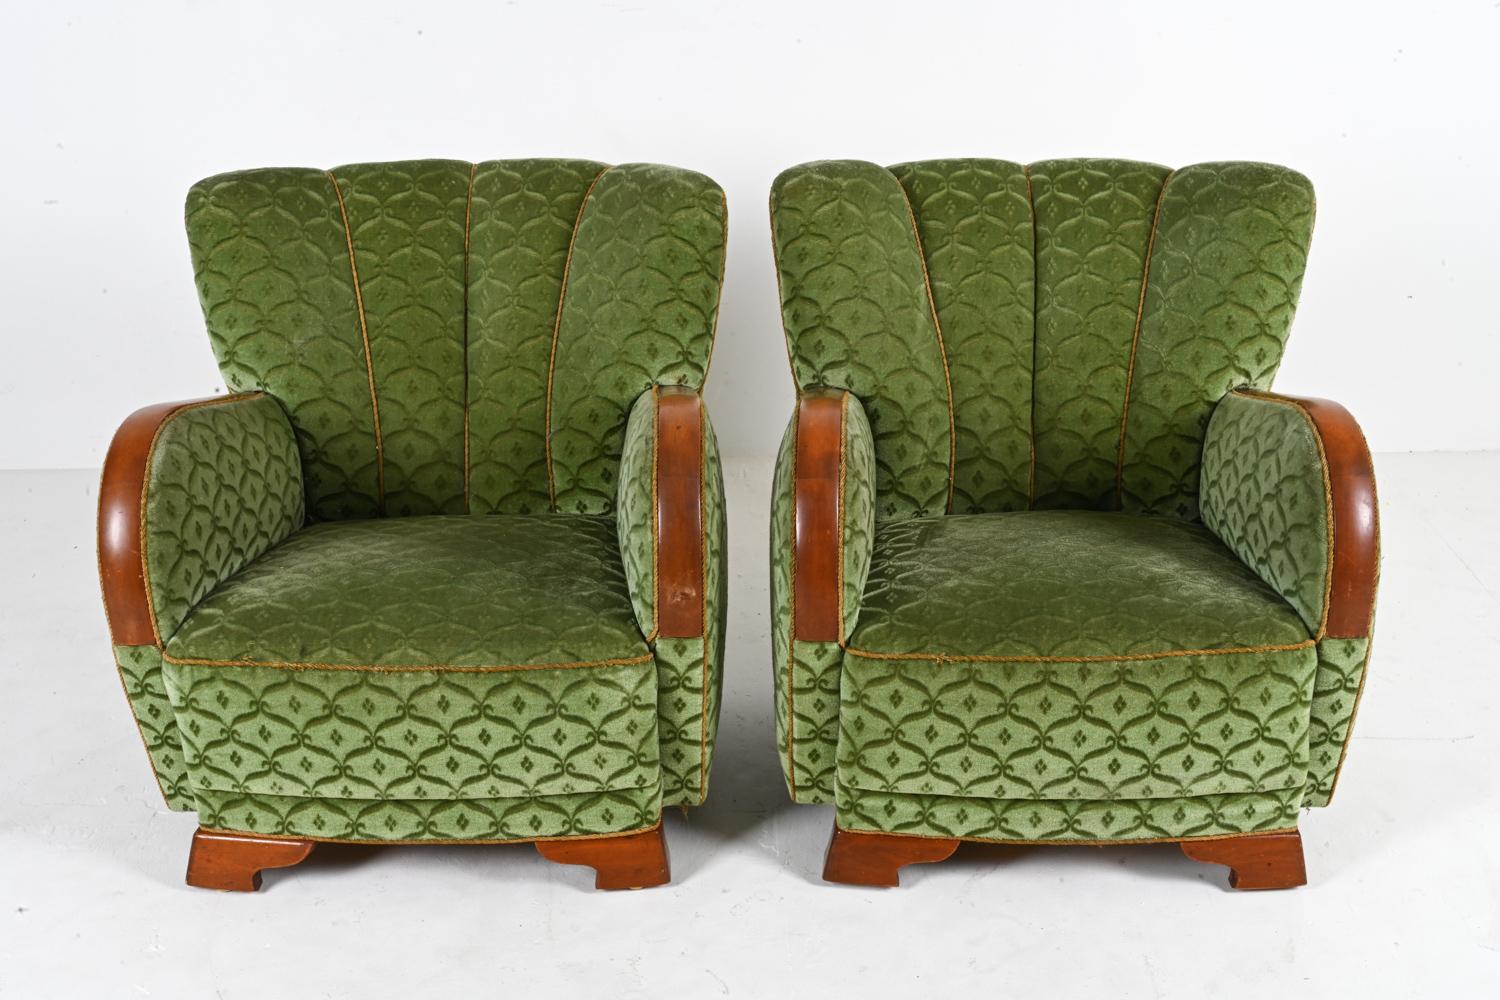 Pair of Mogens Lassen Style Danish Midcentury Lounge or Club Chairs, 1940s In Good Condition For Sale In Norwalk, CT